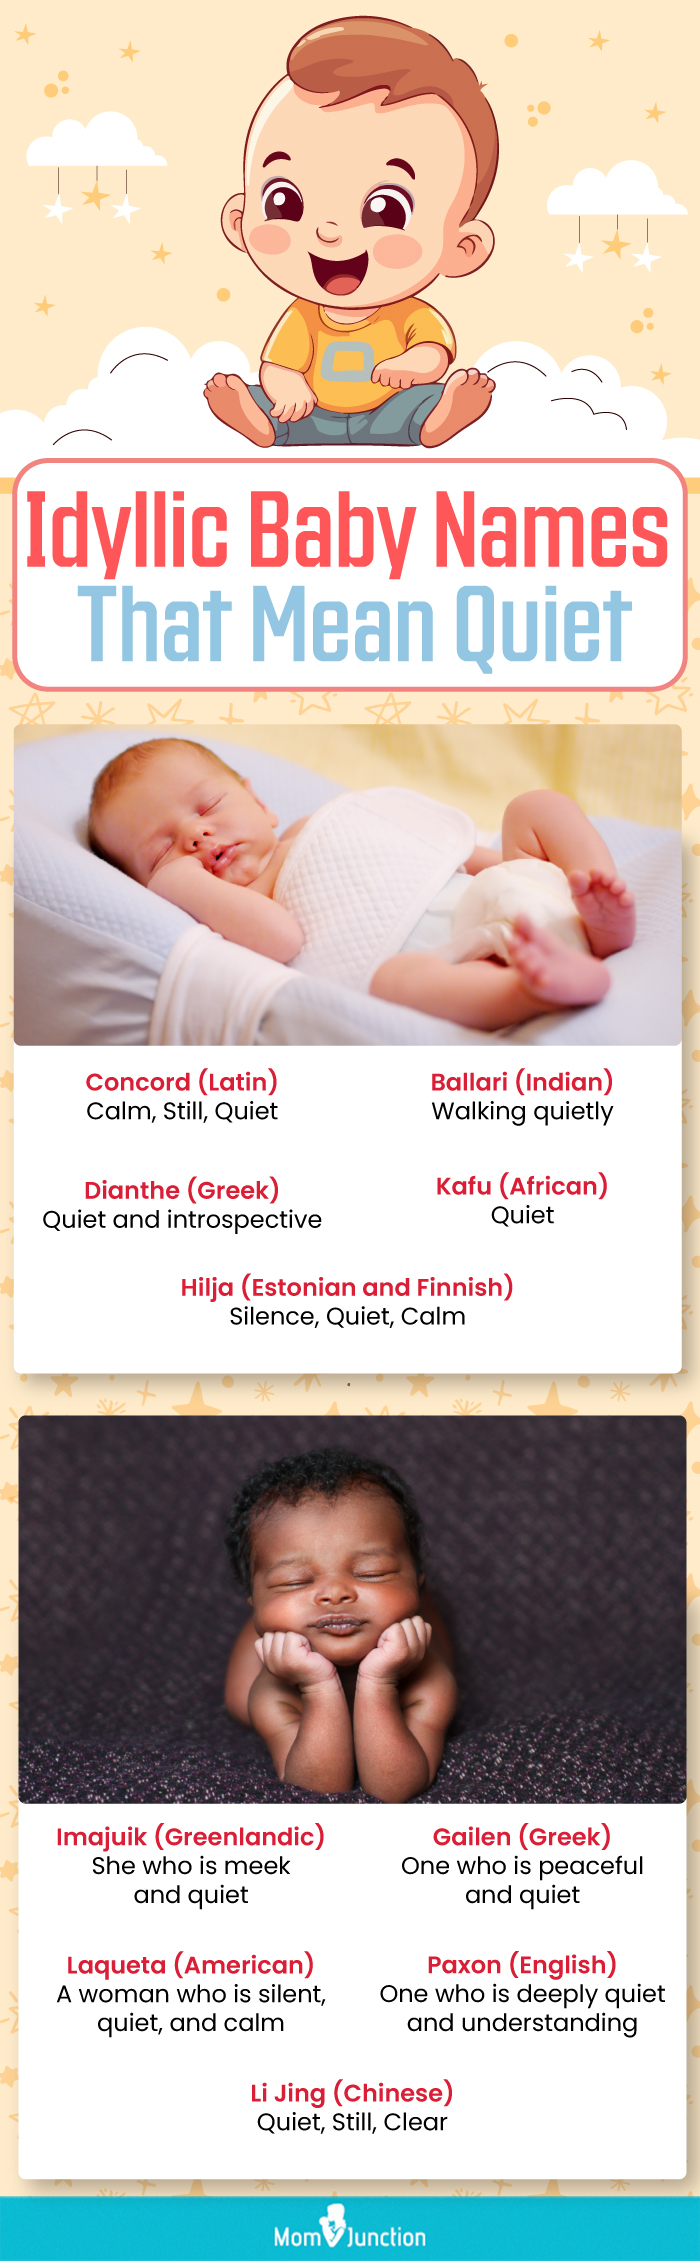 idyllic baby names that means quiet (infographic)